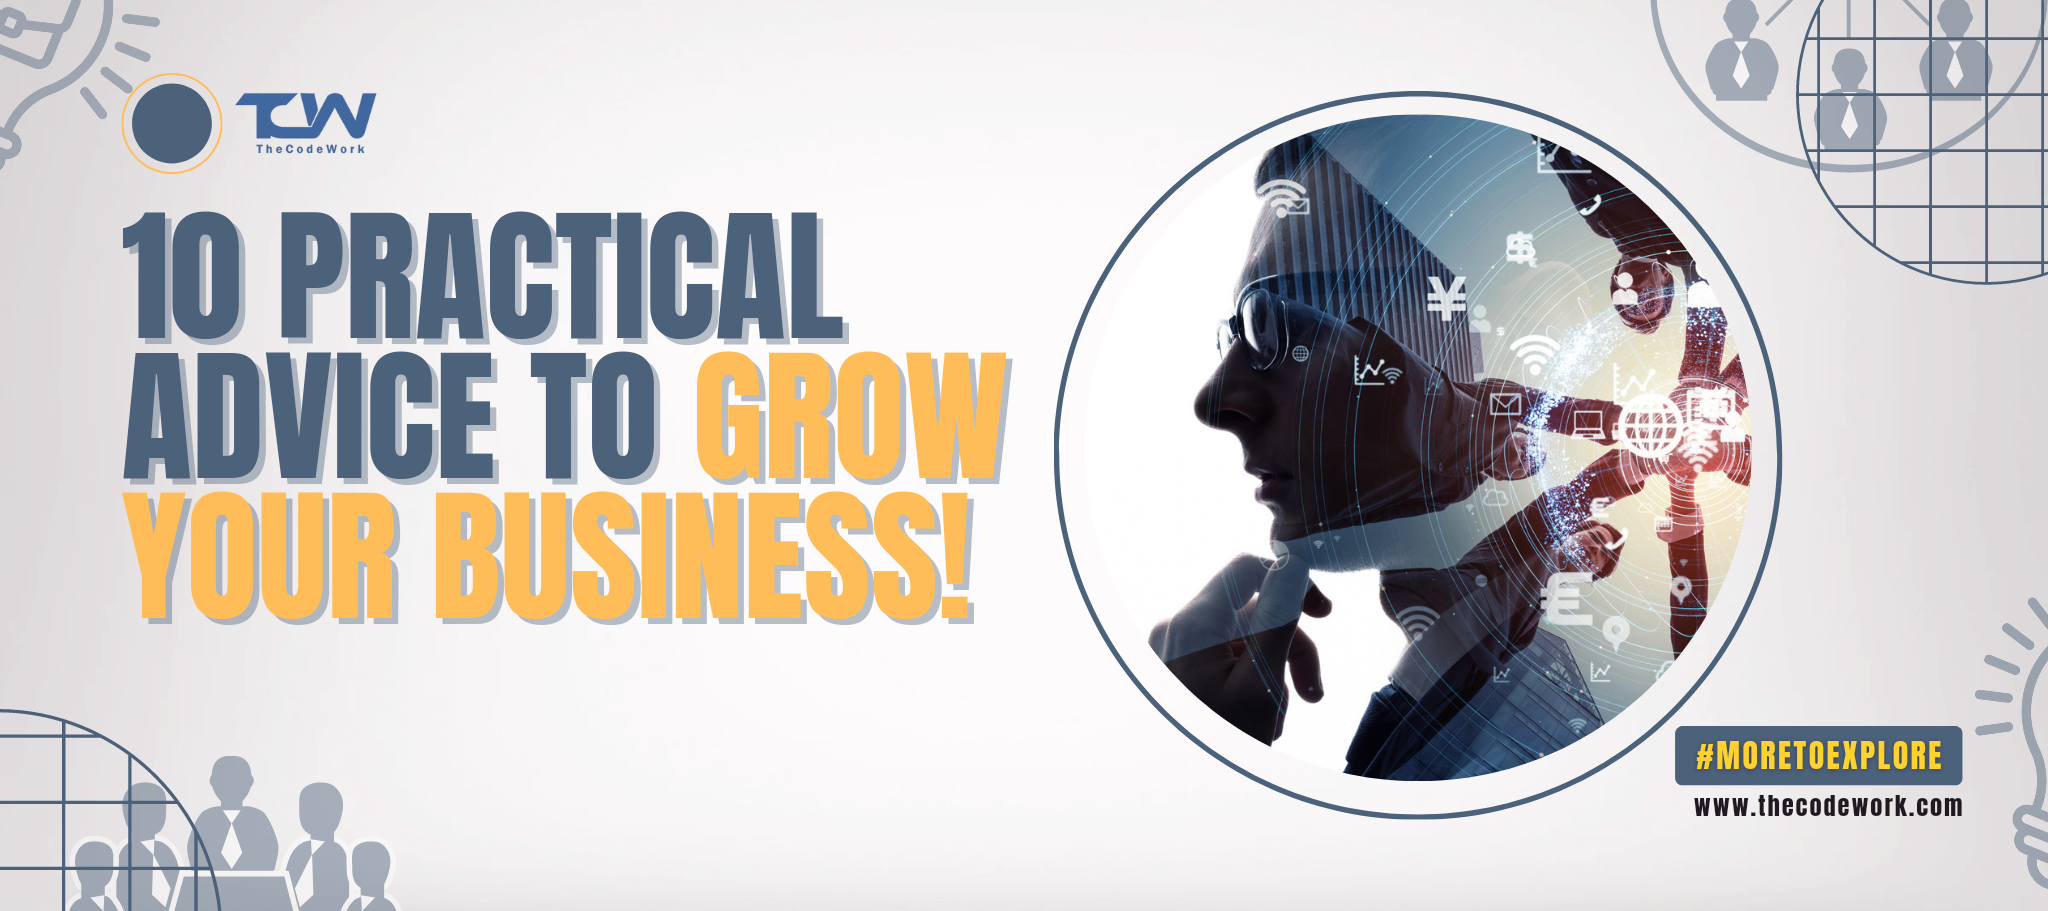 10 Practical Advice to Grow Your Business  